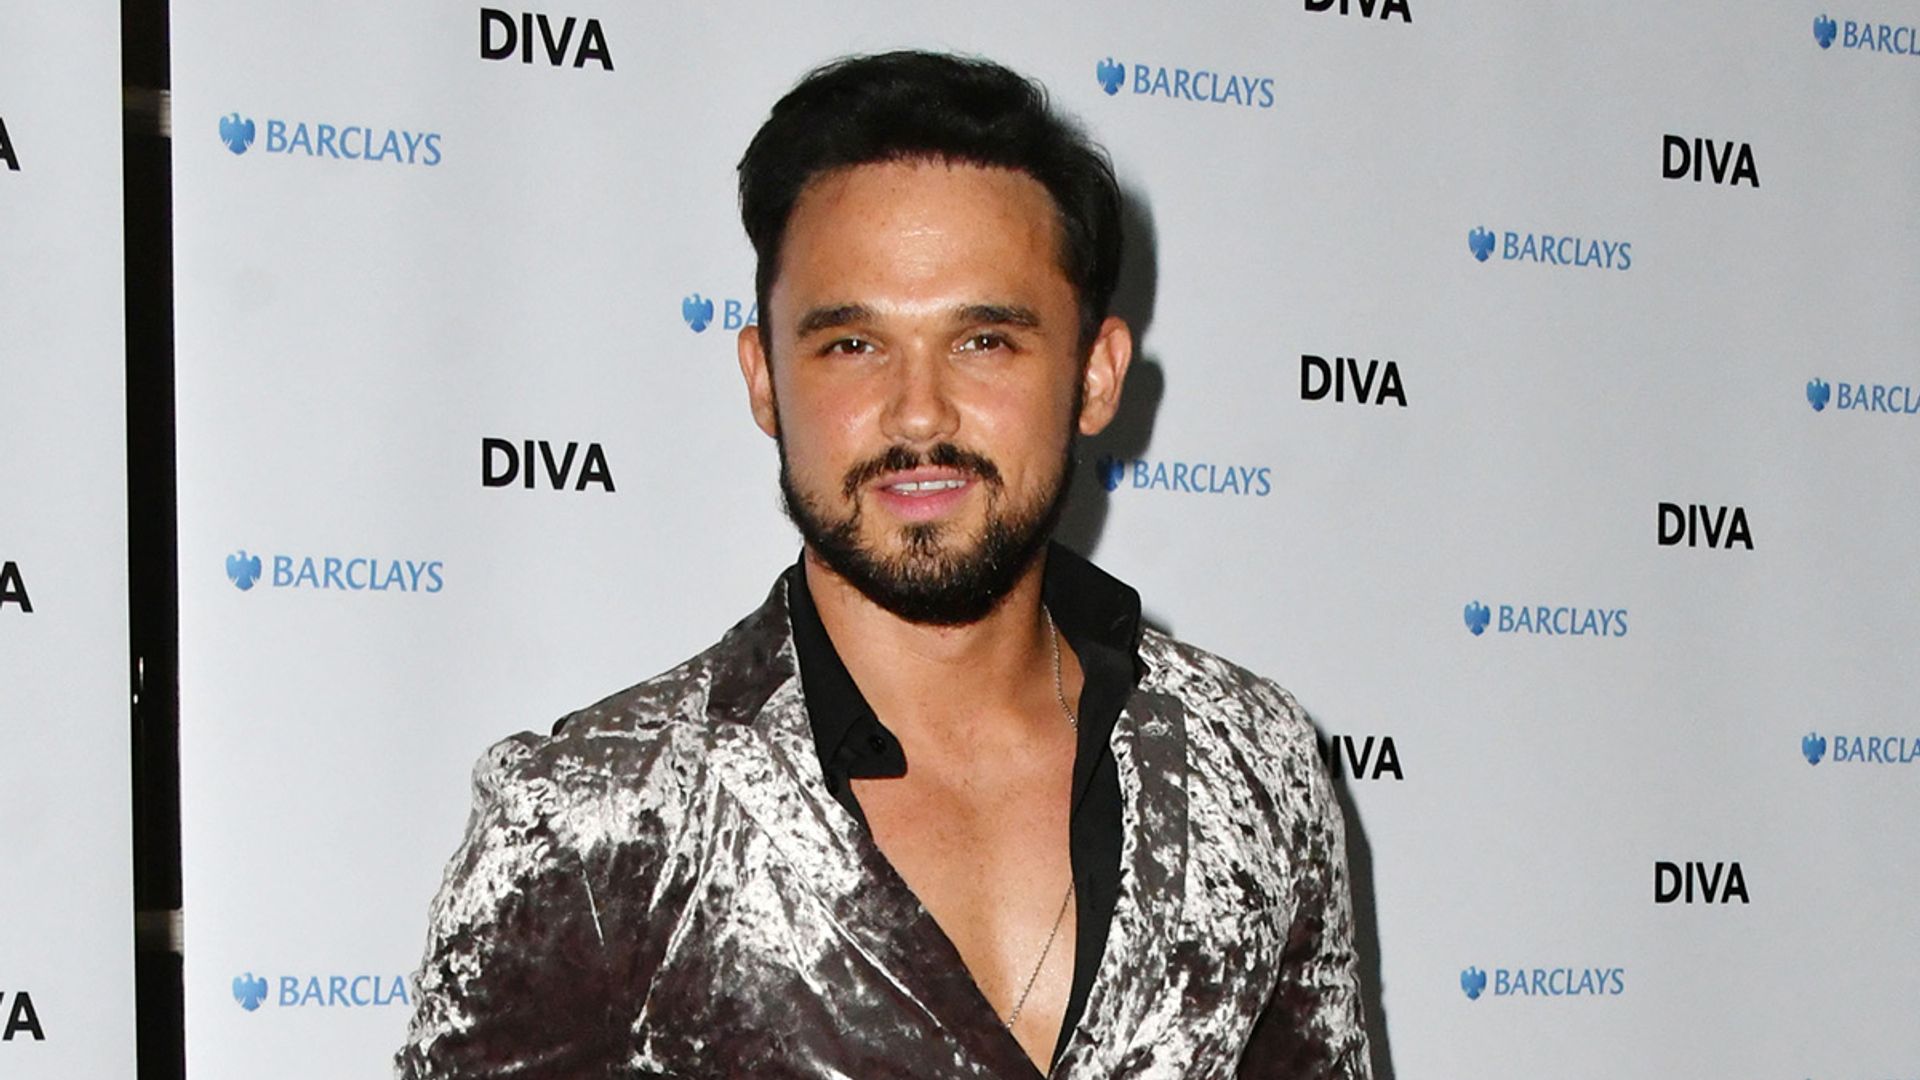 Gareth Gates shares rare photo of his daughter following split from fiancée